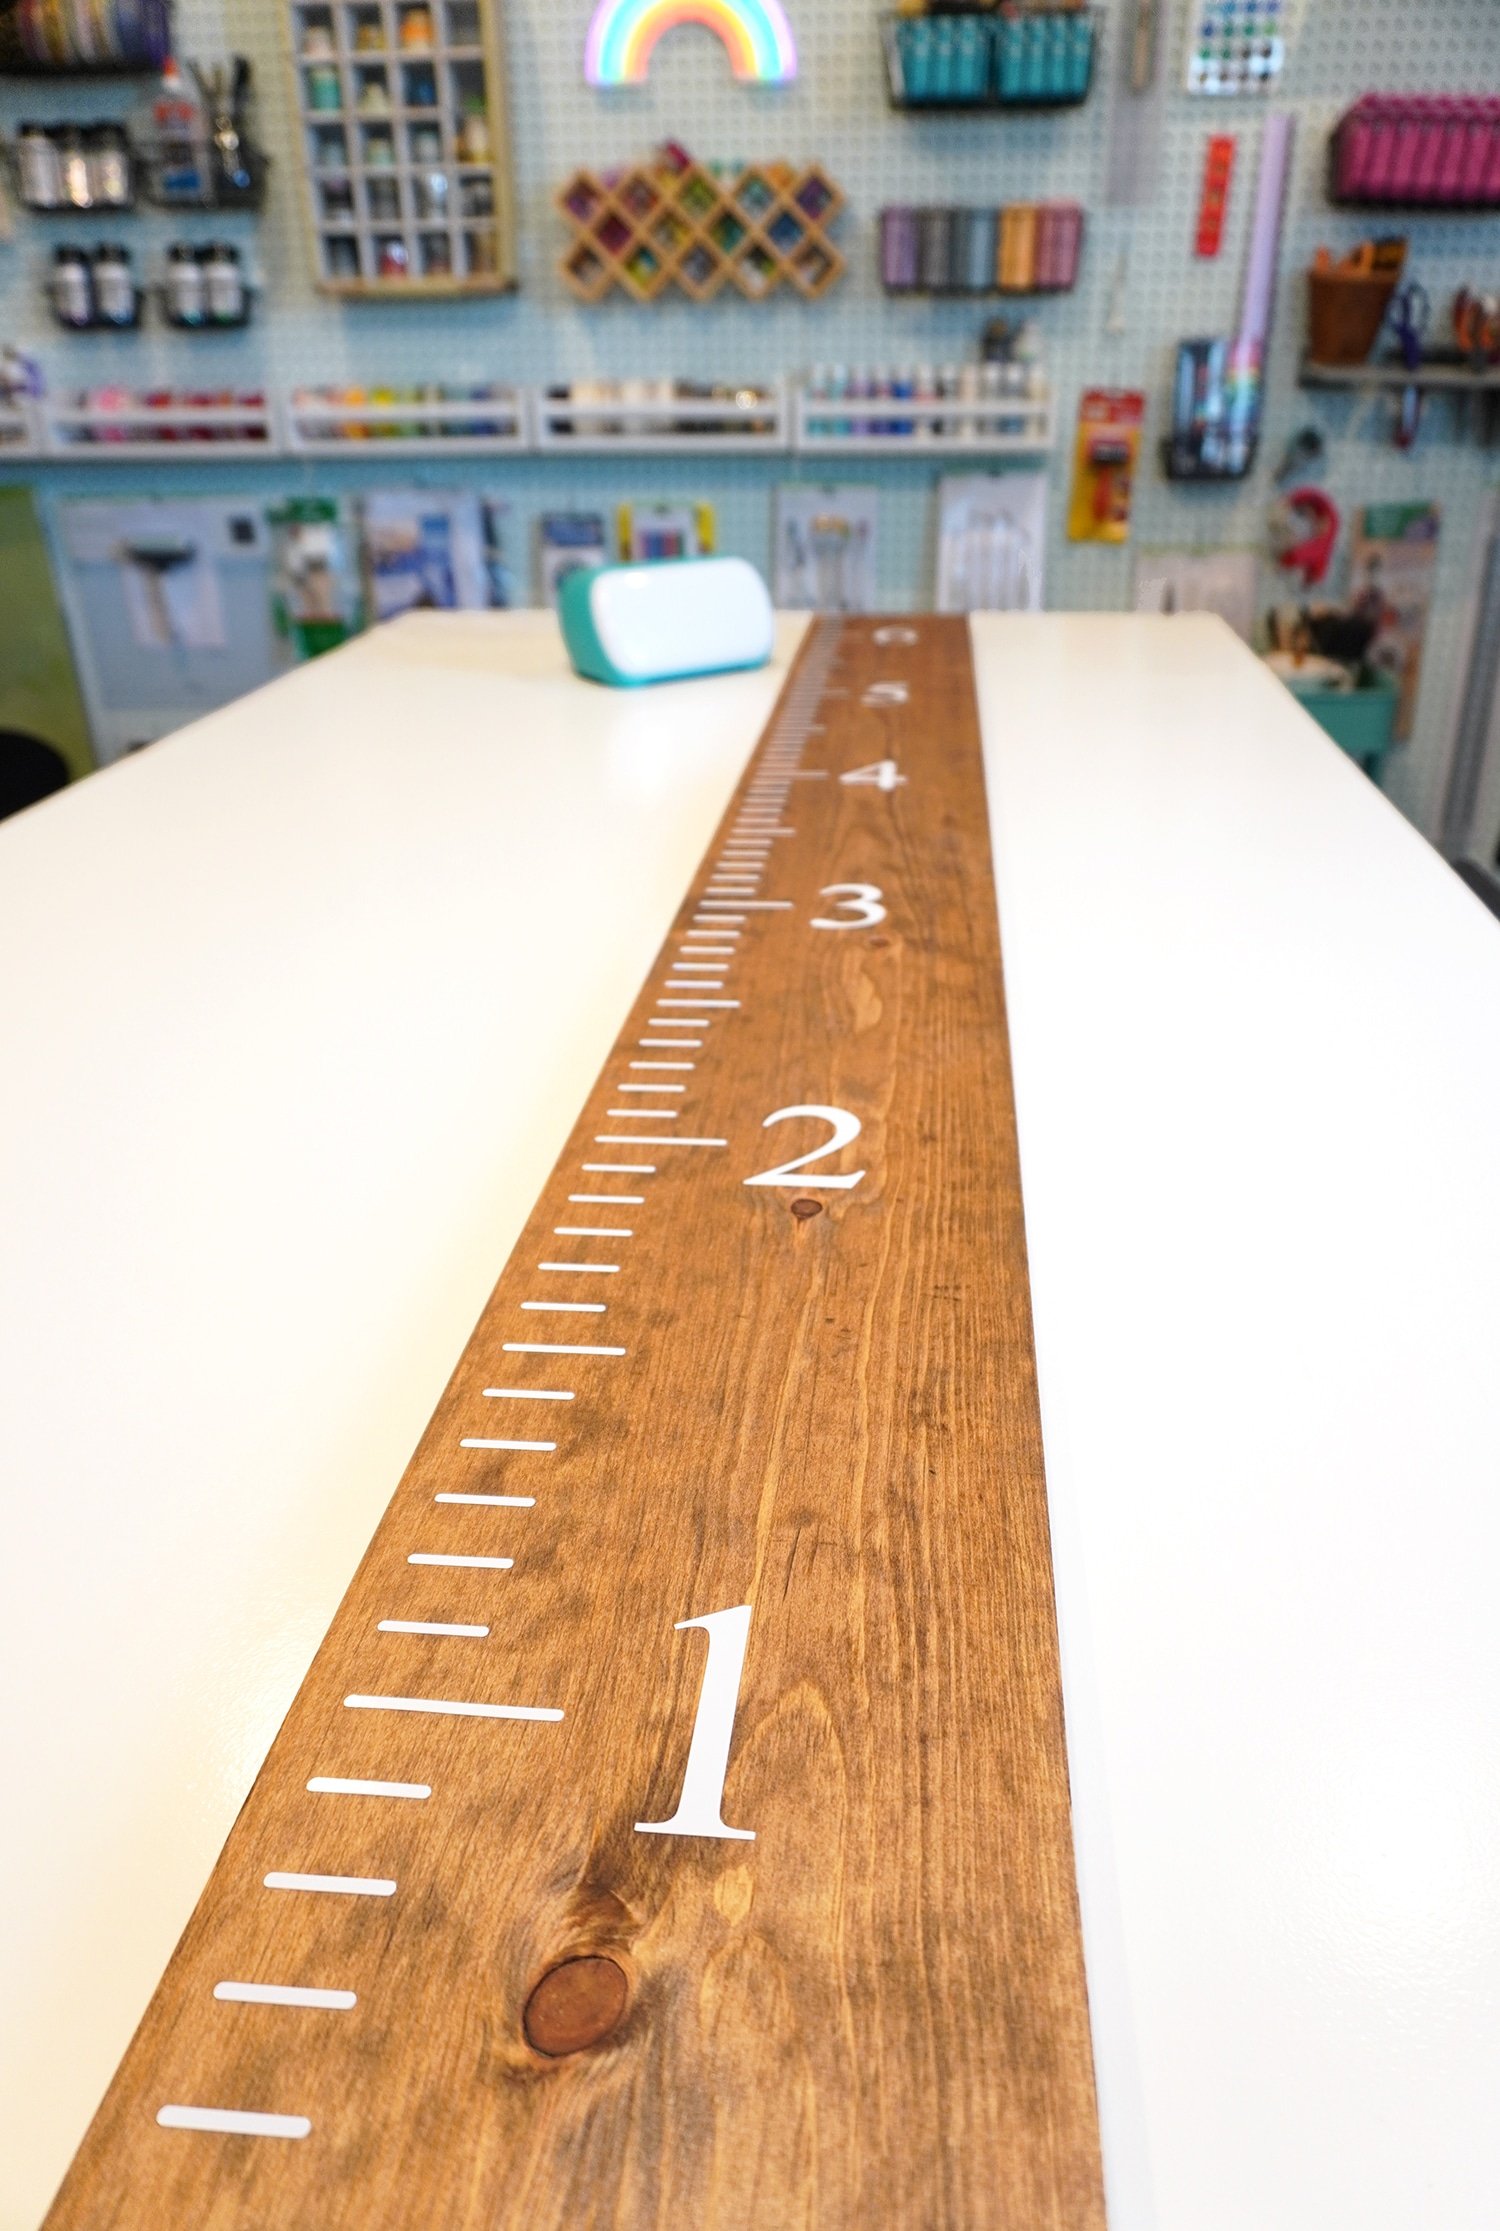 finished DIY growth chart made into shape of giant wooden ruler